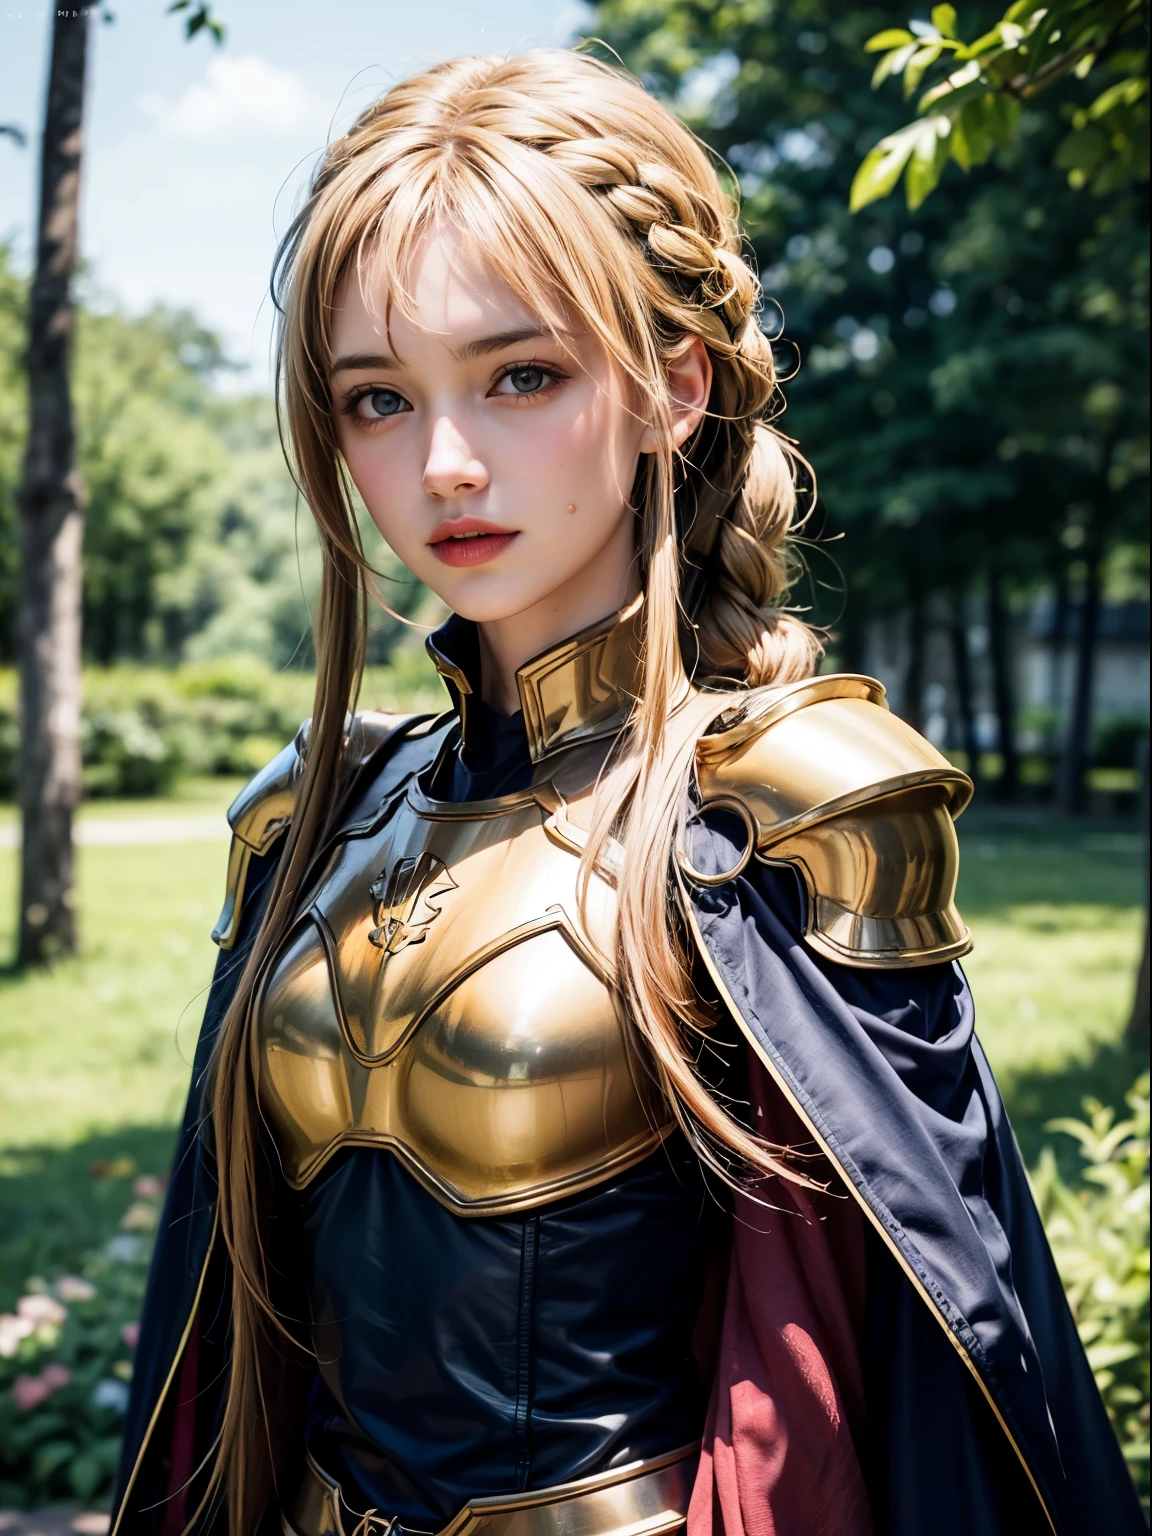 Alicesburg, Alice Zuberg, bangs, blue eyes, bionde, Hair between the eyes, Very long hair, Braiding, Hair ties, white Hair ties,, BREAK dress, cape, armor, Blue clothes, shoulder armor, Gauntlet, Cane , breastplate, armored dress, defect, blue cape, knight, gold armor, body armor,, BREAK outside, forest, BREAK looking at viewer, BREAK (artwork:1.2), highest quality, High resolution, unity wallpaper 8K, (figure:0.8), (Beautiful fine details:1.6), Very detailedな顔, Perfect lighting, Very detailedなCG, (Perfect hands, Perfect Anatomy), （8K，RAW Photos），（Best Quality），（Masterpiece Loose），（Realistic，）（Realistic），（High resolution），Hyper Detail，（Gentle Realism：1.1），Beautiful Face， （1 Female：1.1），High resolution), (8K), (Very detailed), (4K), (Pixiv), Perfect Face, Beautiful eyes and face, (highest quality), (Very detailed), Detailed face and eyes, (alone), Textured skin, absurdes, High resolution,

